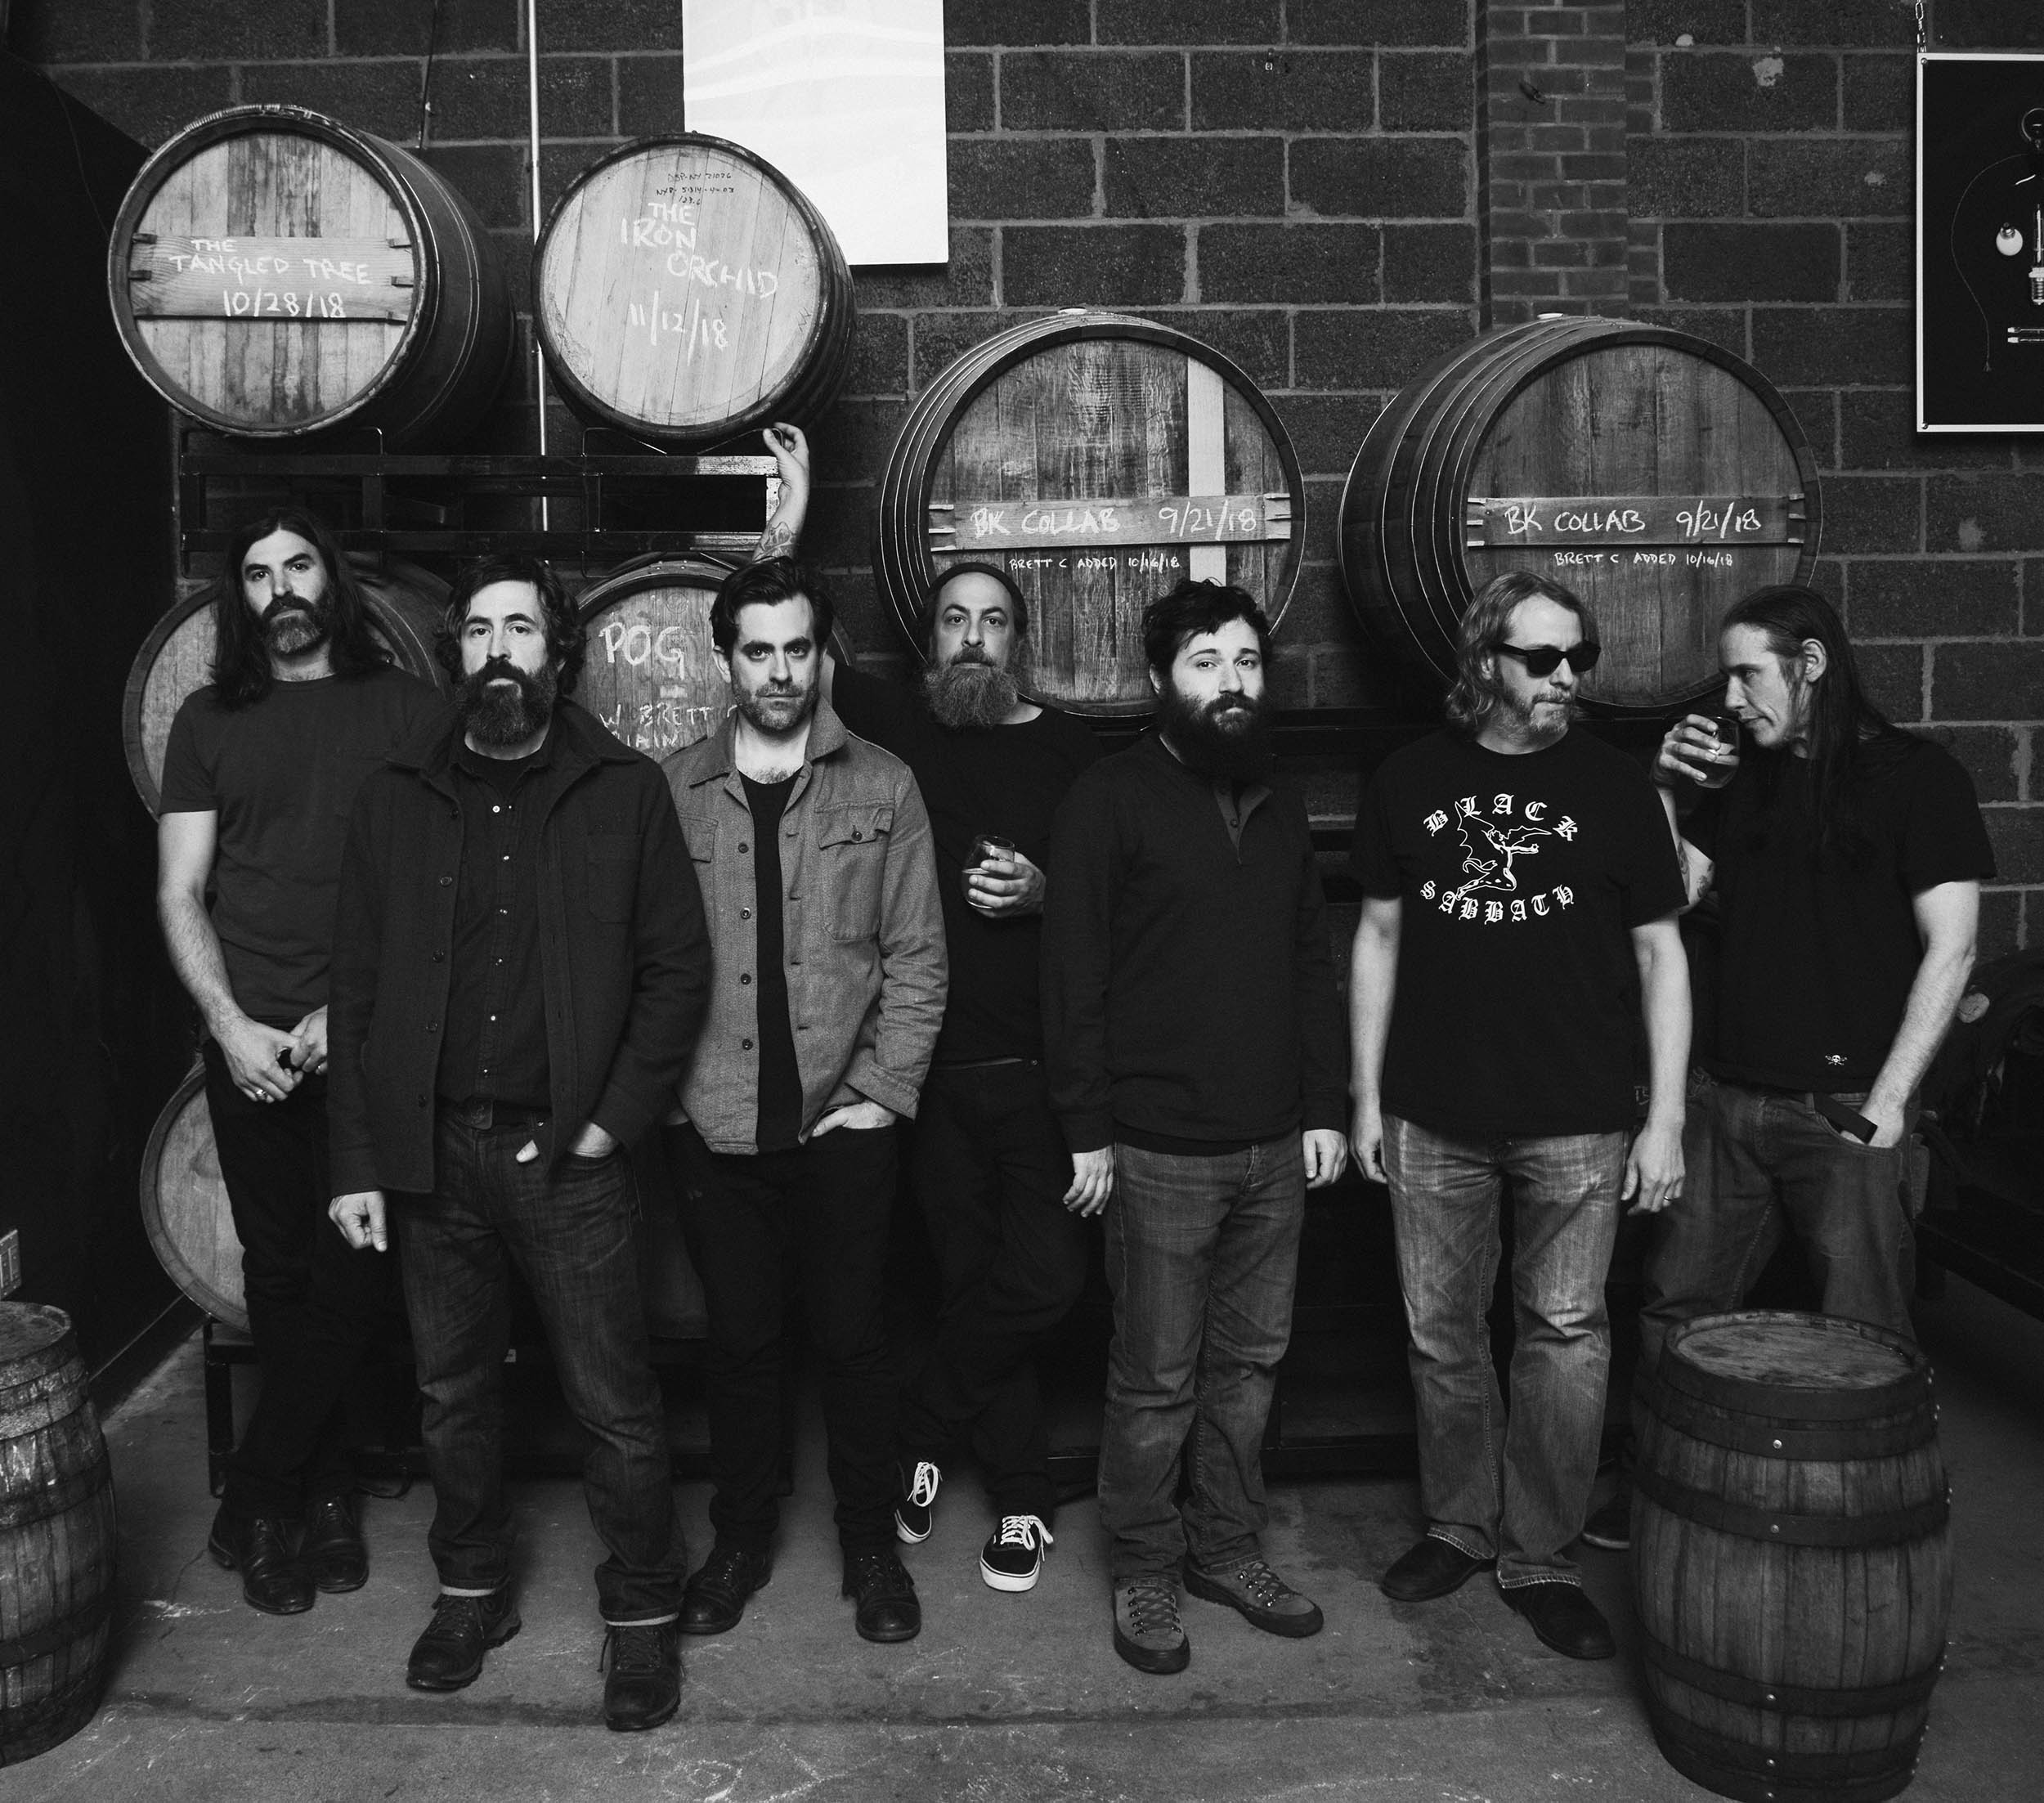 The Budos Band booking agent